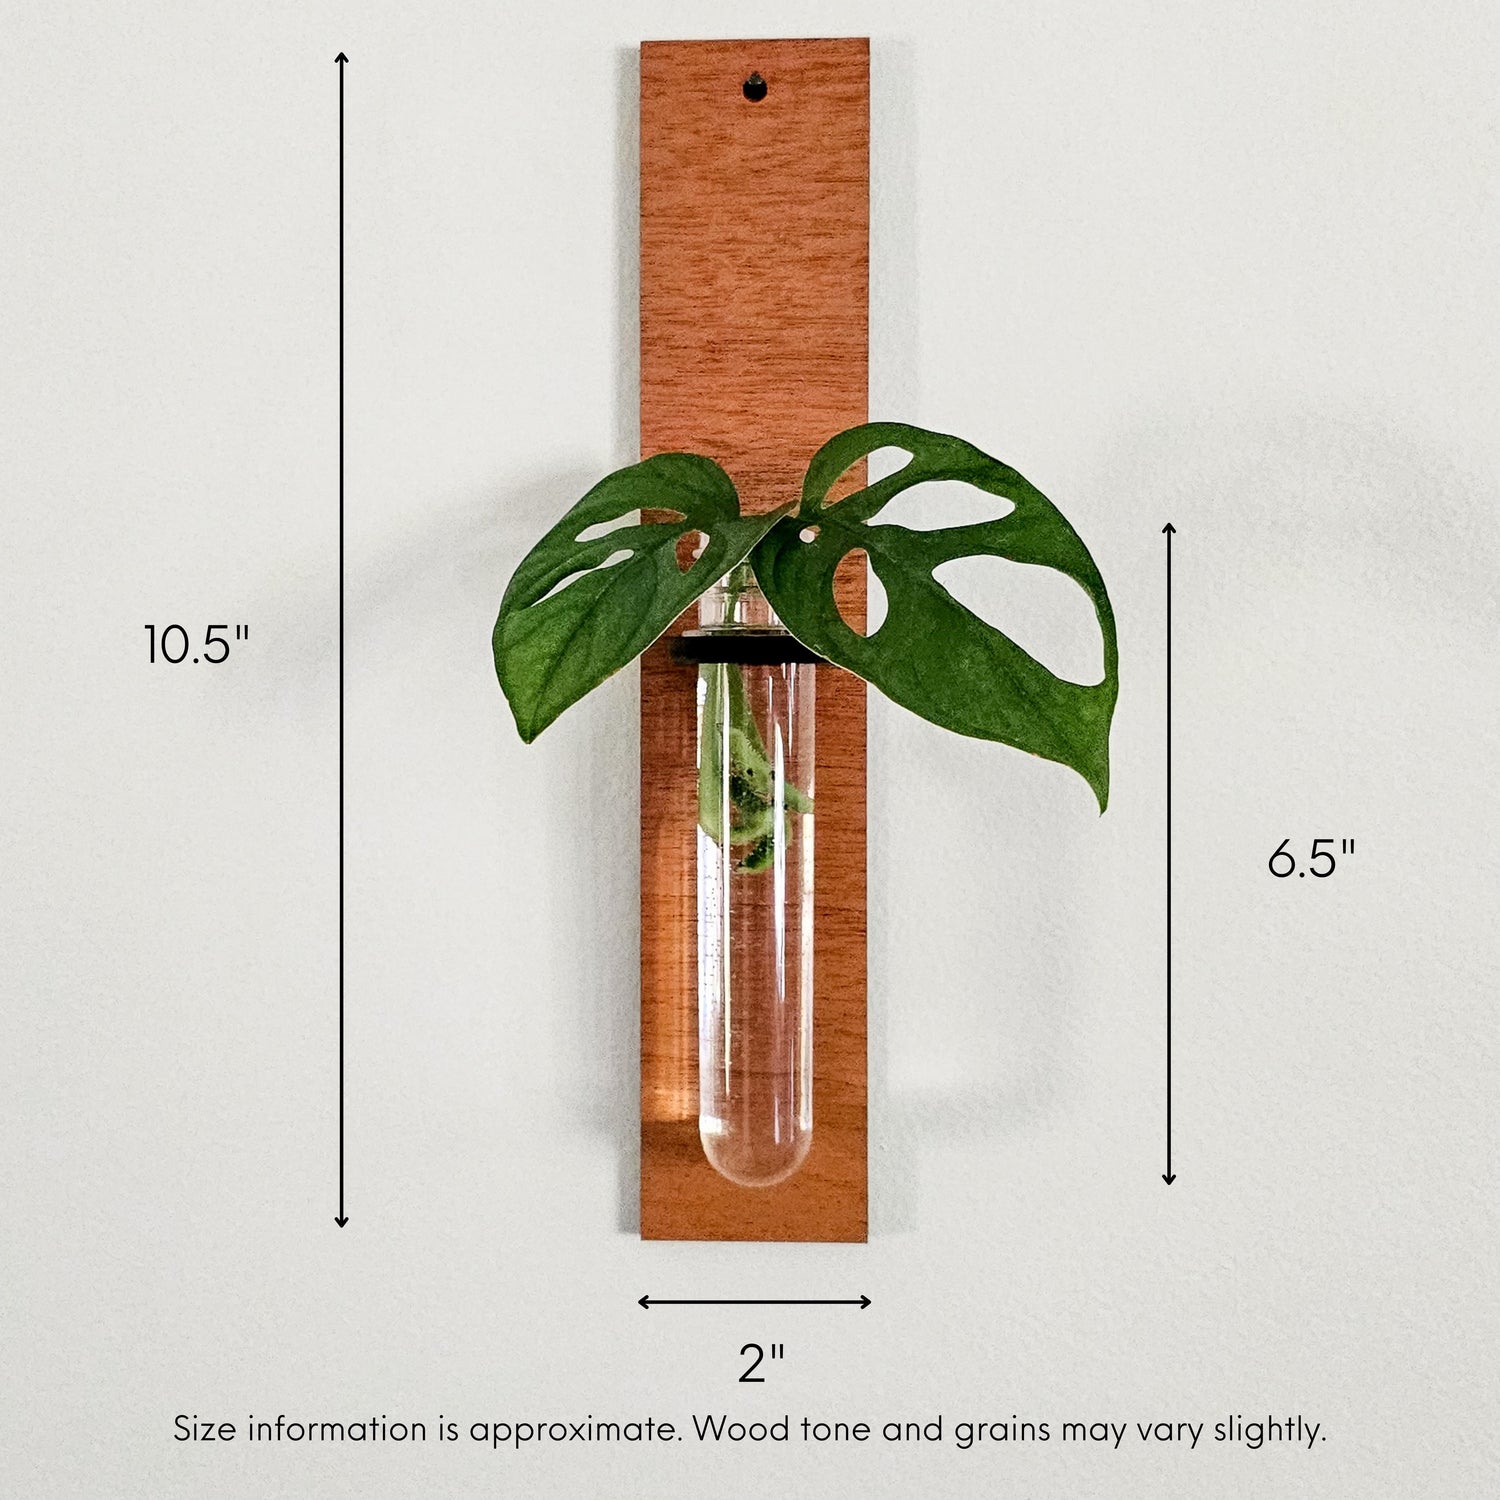 Wall hanging test tube propagation station for growing roots on plant cuttings in water. Small, dark colored wood plant hanger in a long rectangular bar design with monstera adansonii cuttings.